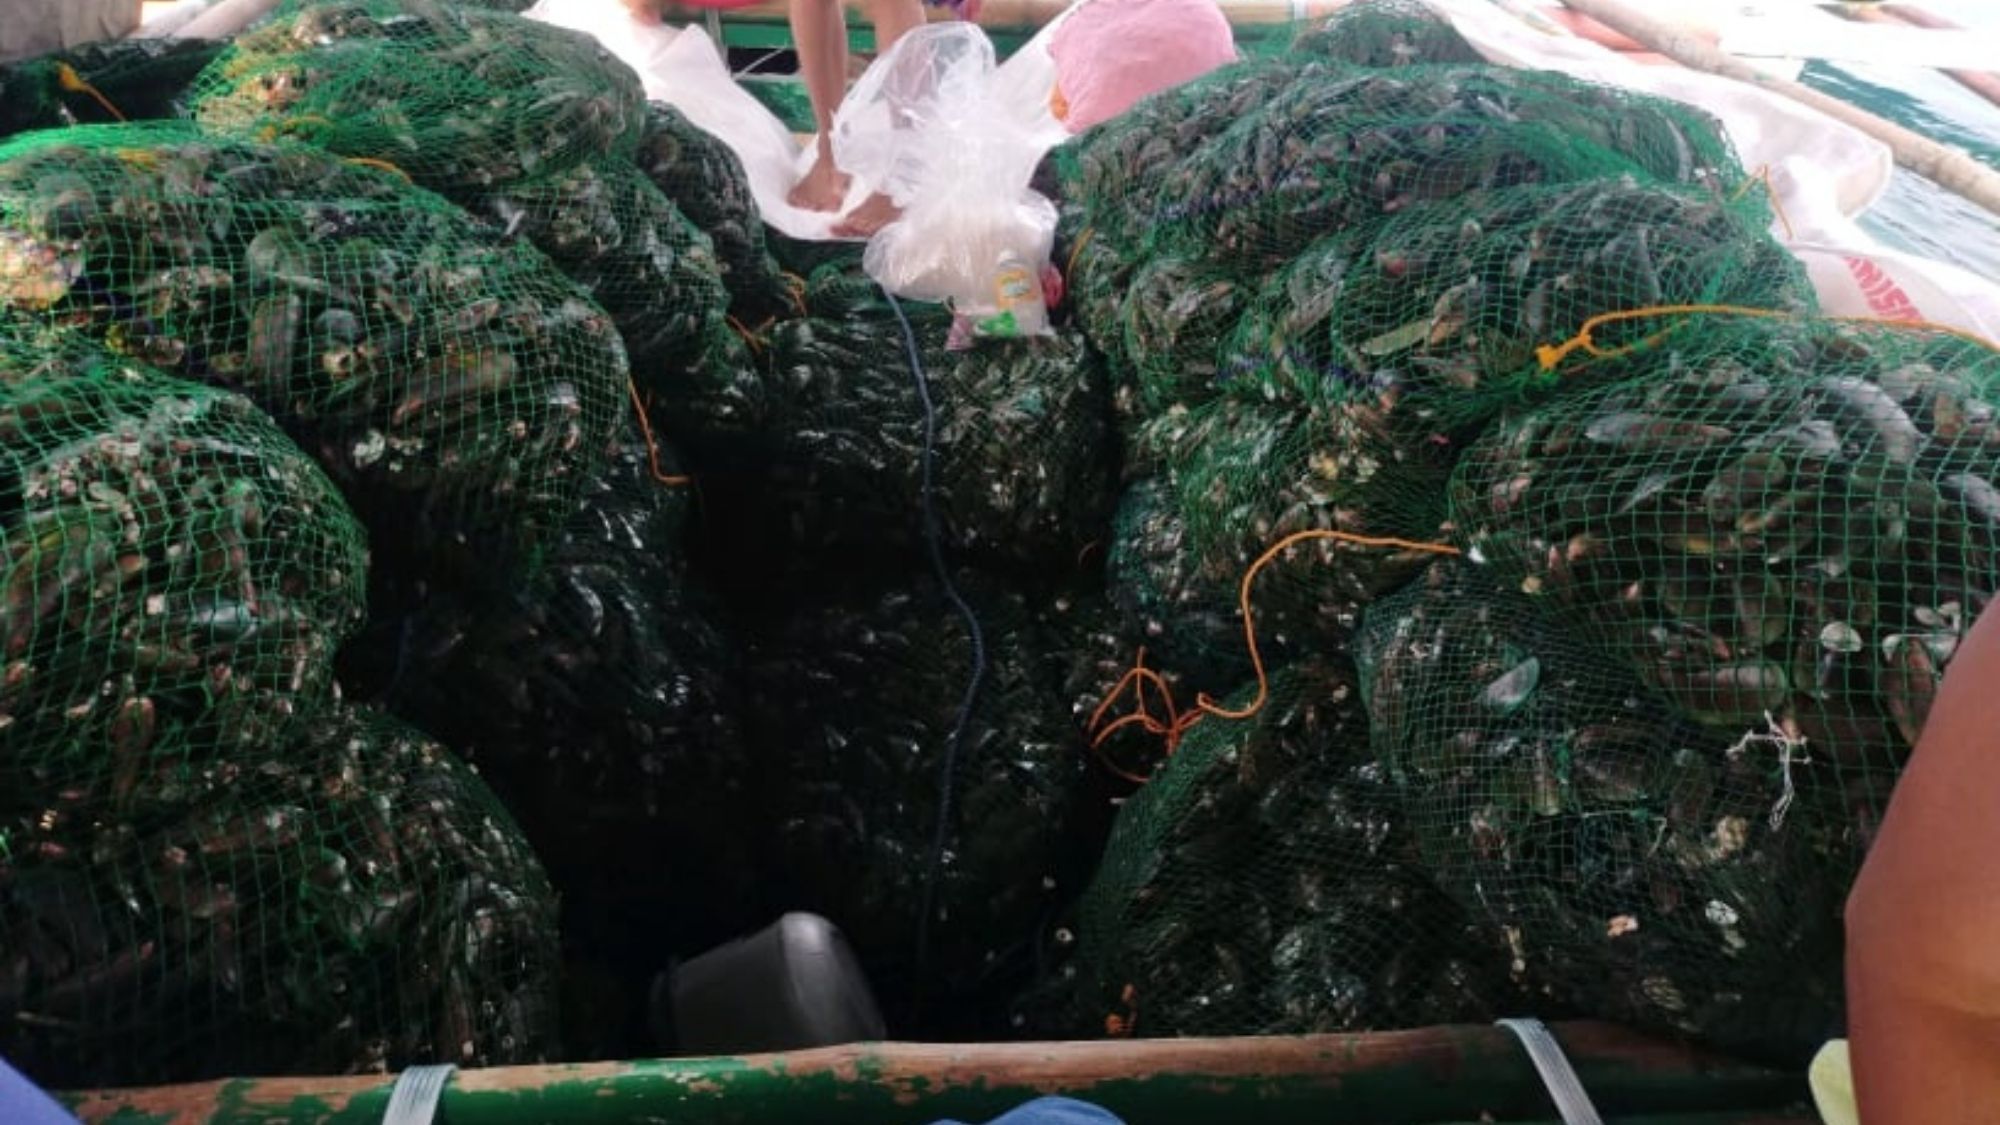 Authorities seize illegally harvested red-tide laced green mussels